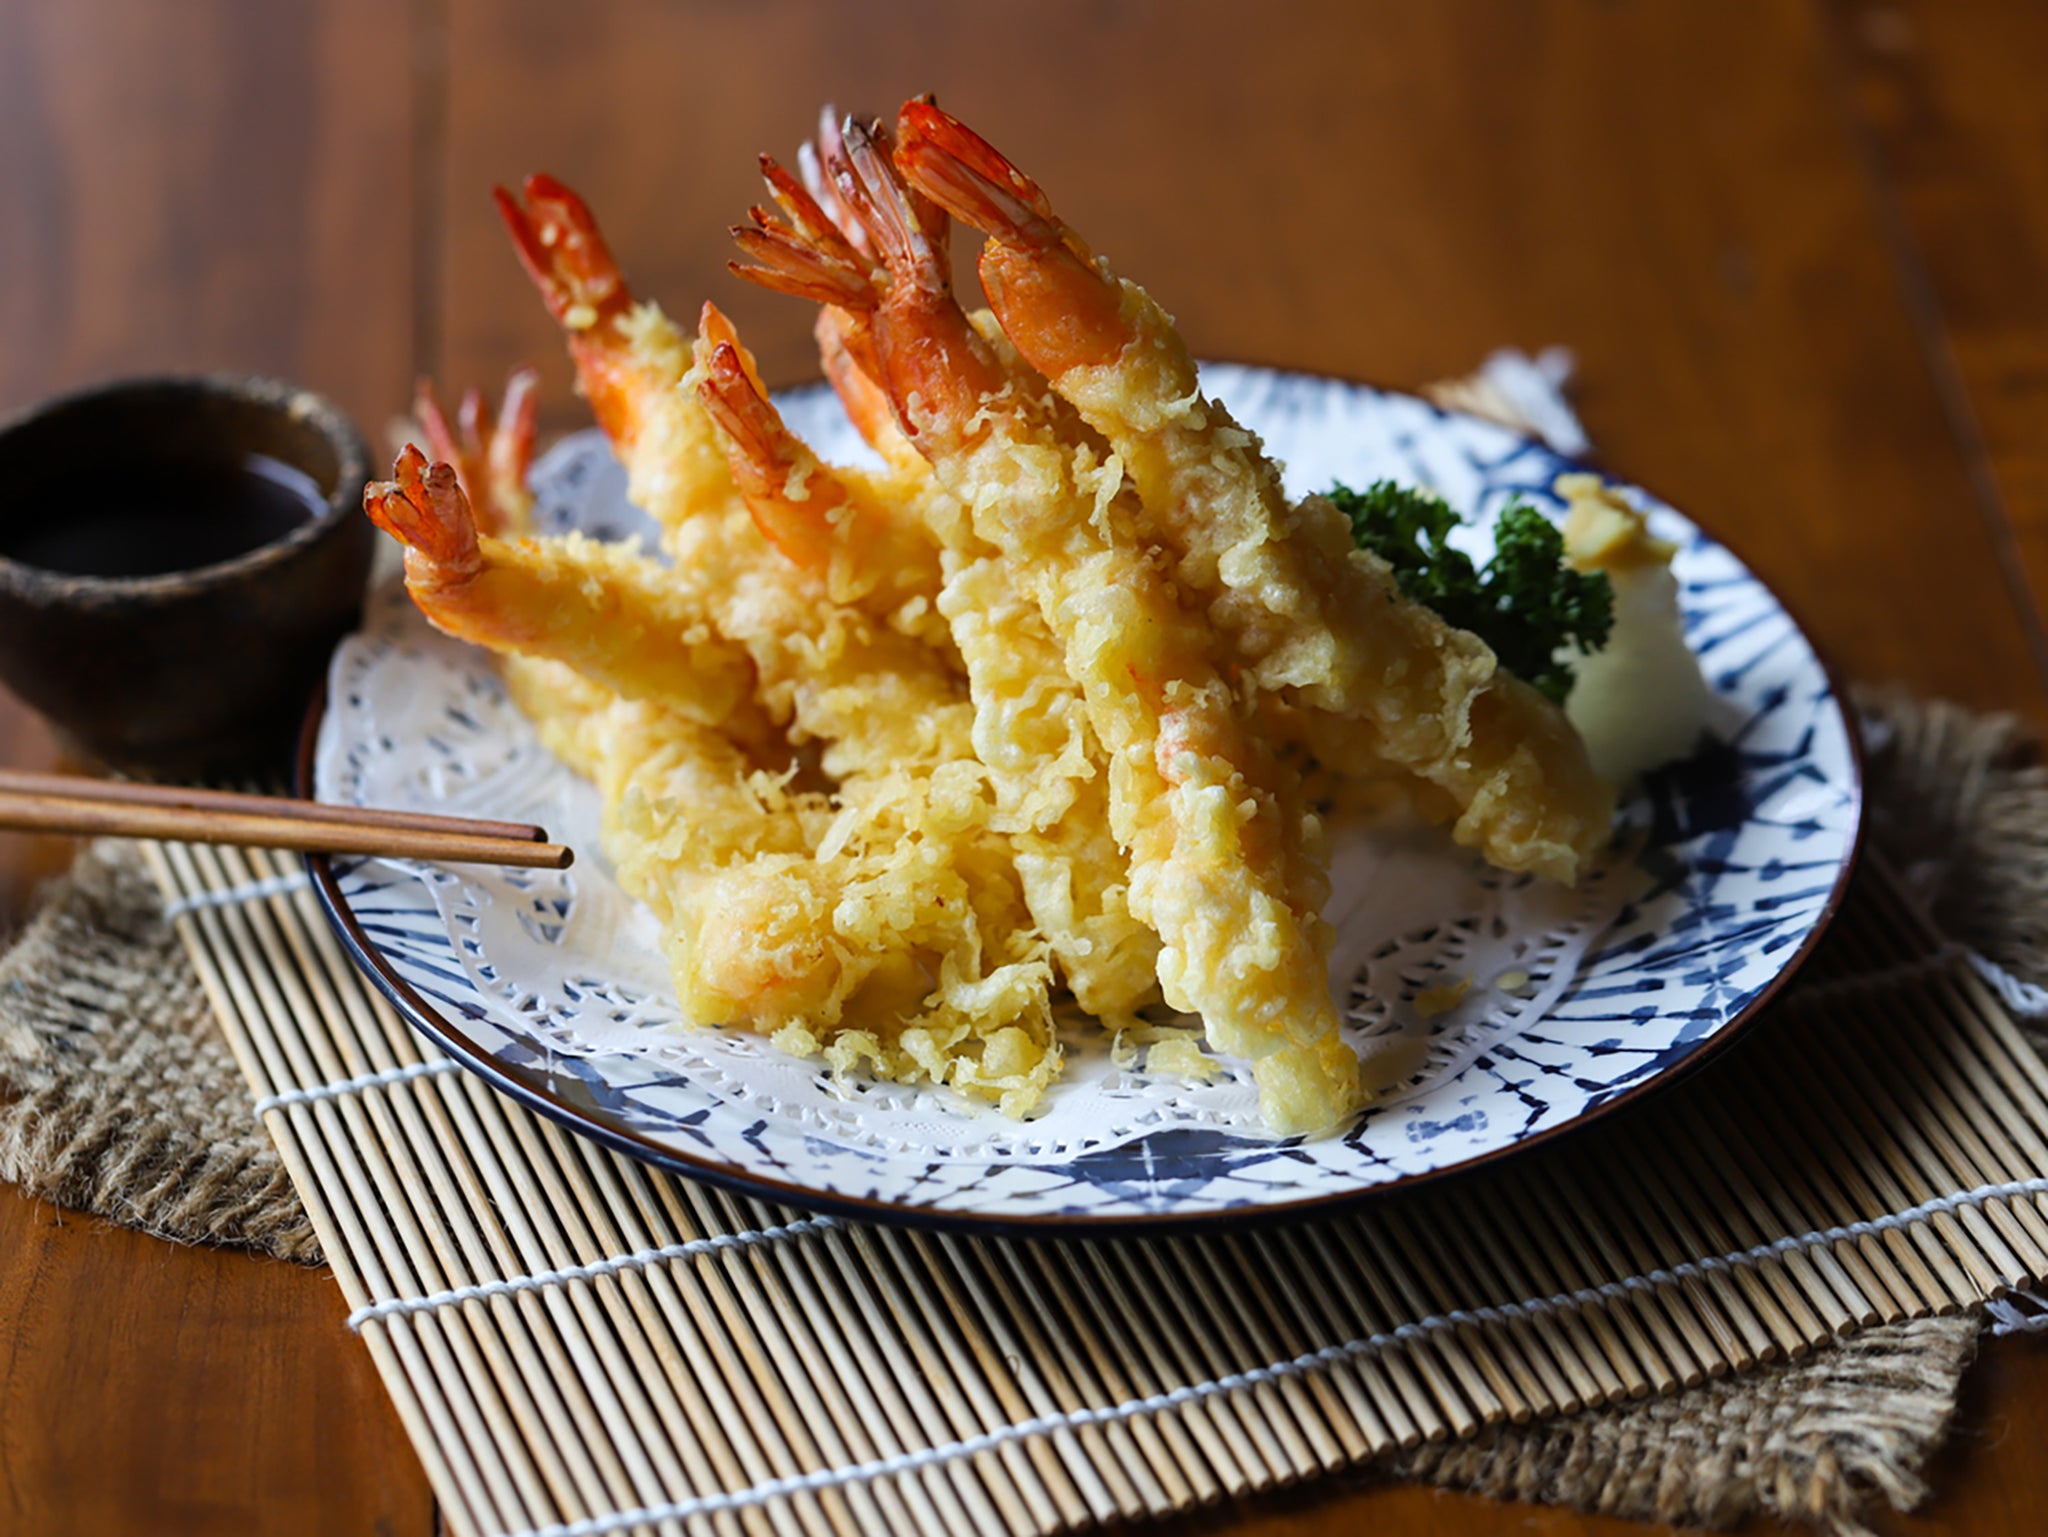 Portuguese missionaries brought the Western-style cooking method of tempura to Japan